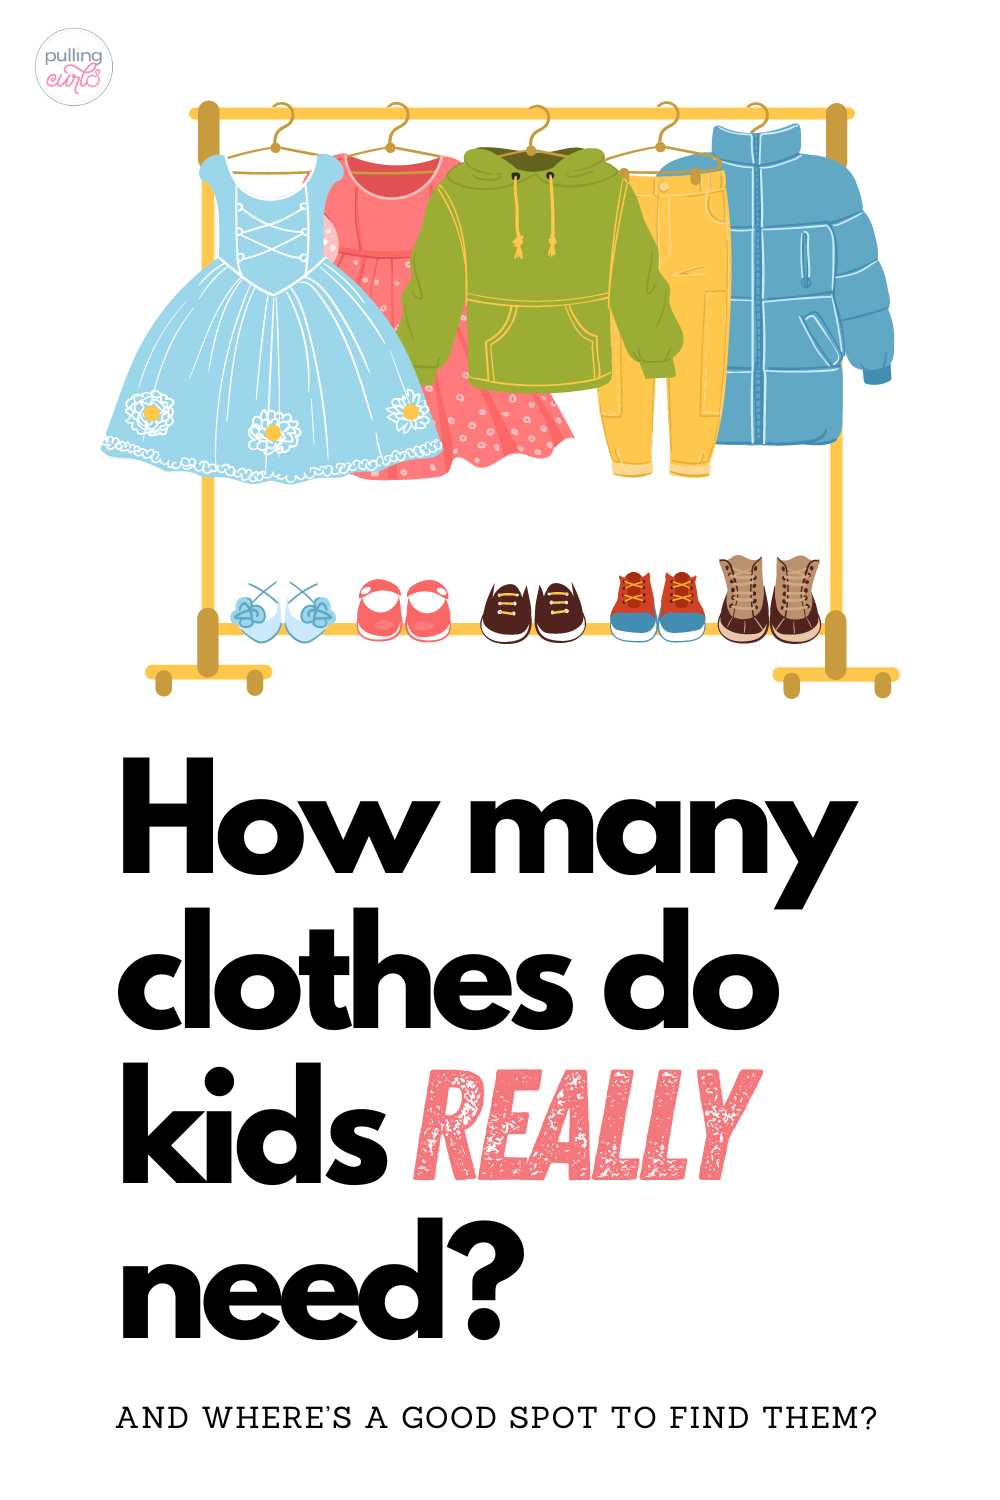 how many kids clothes do I really need? Children / toddlers / school-aged / newborn / babies / teenagers / stores / shops/ online via @pullingcurls